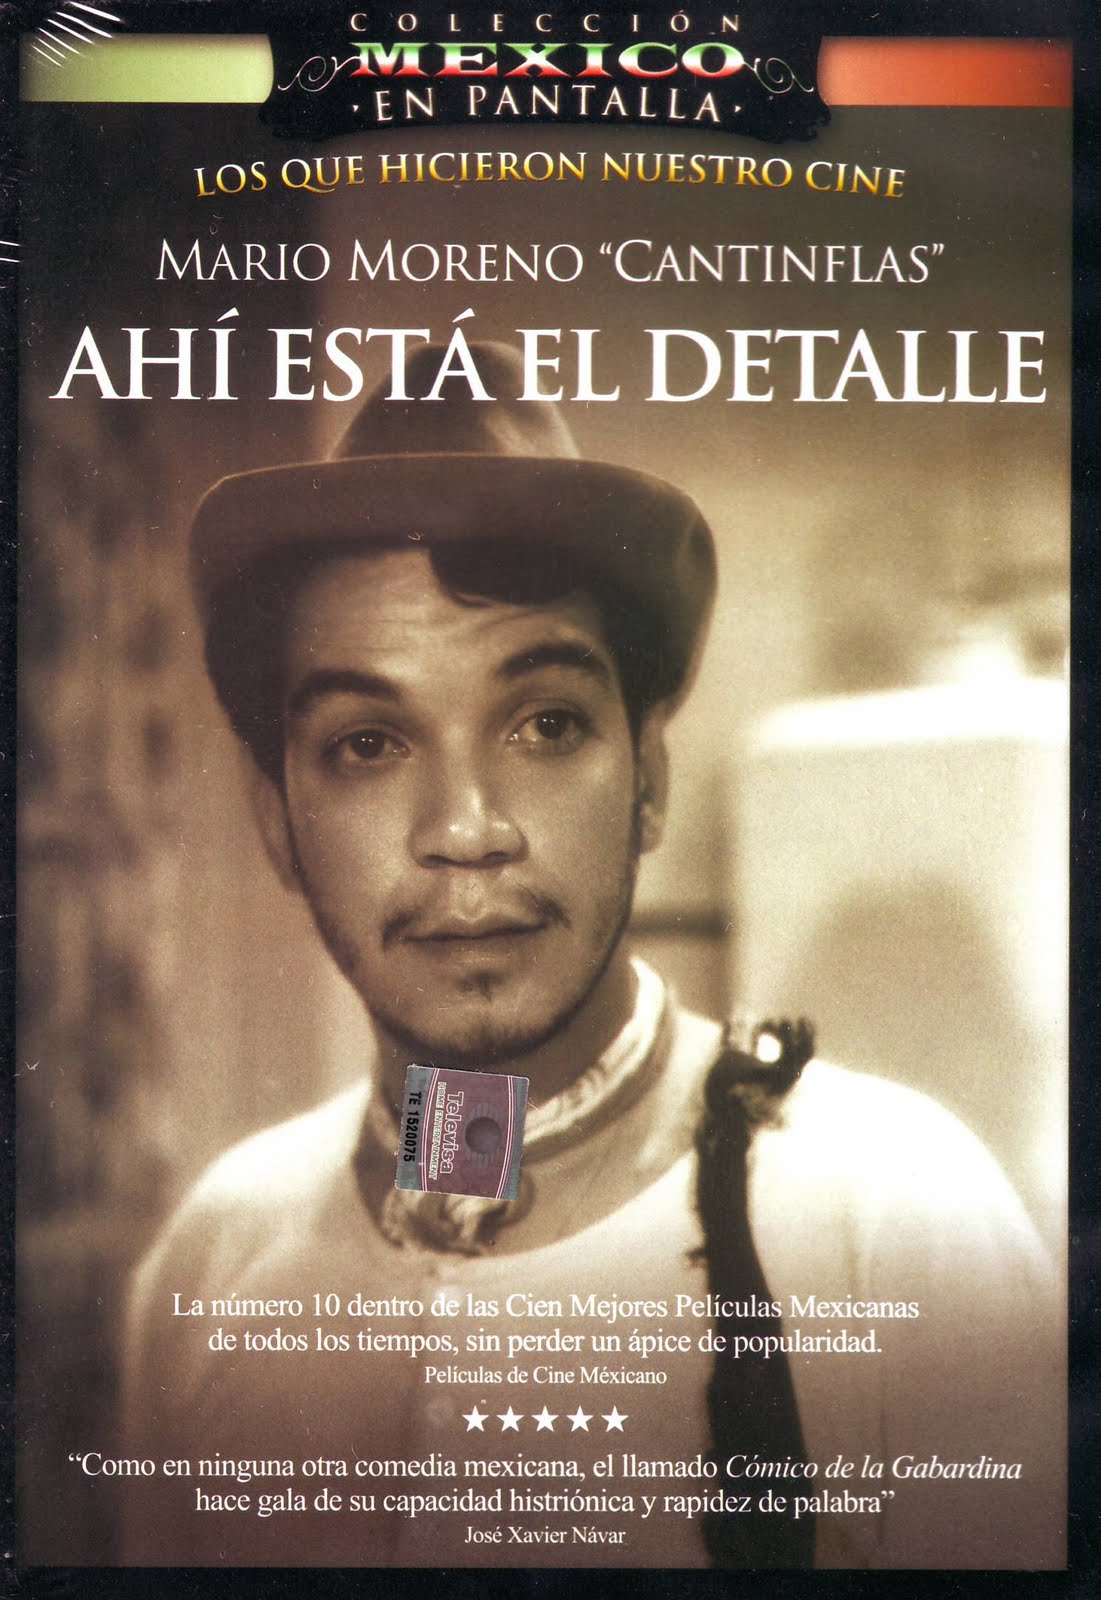 Cantinflas - Images Colection